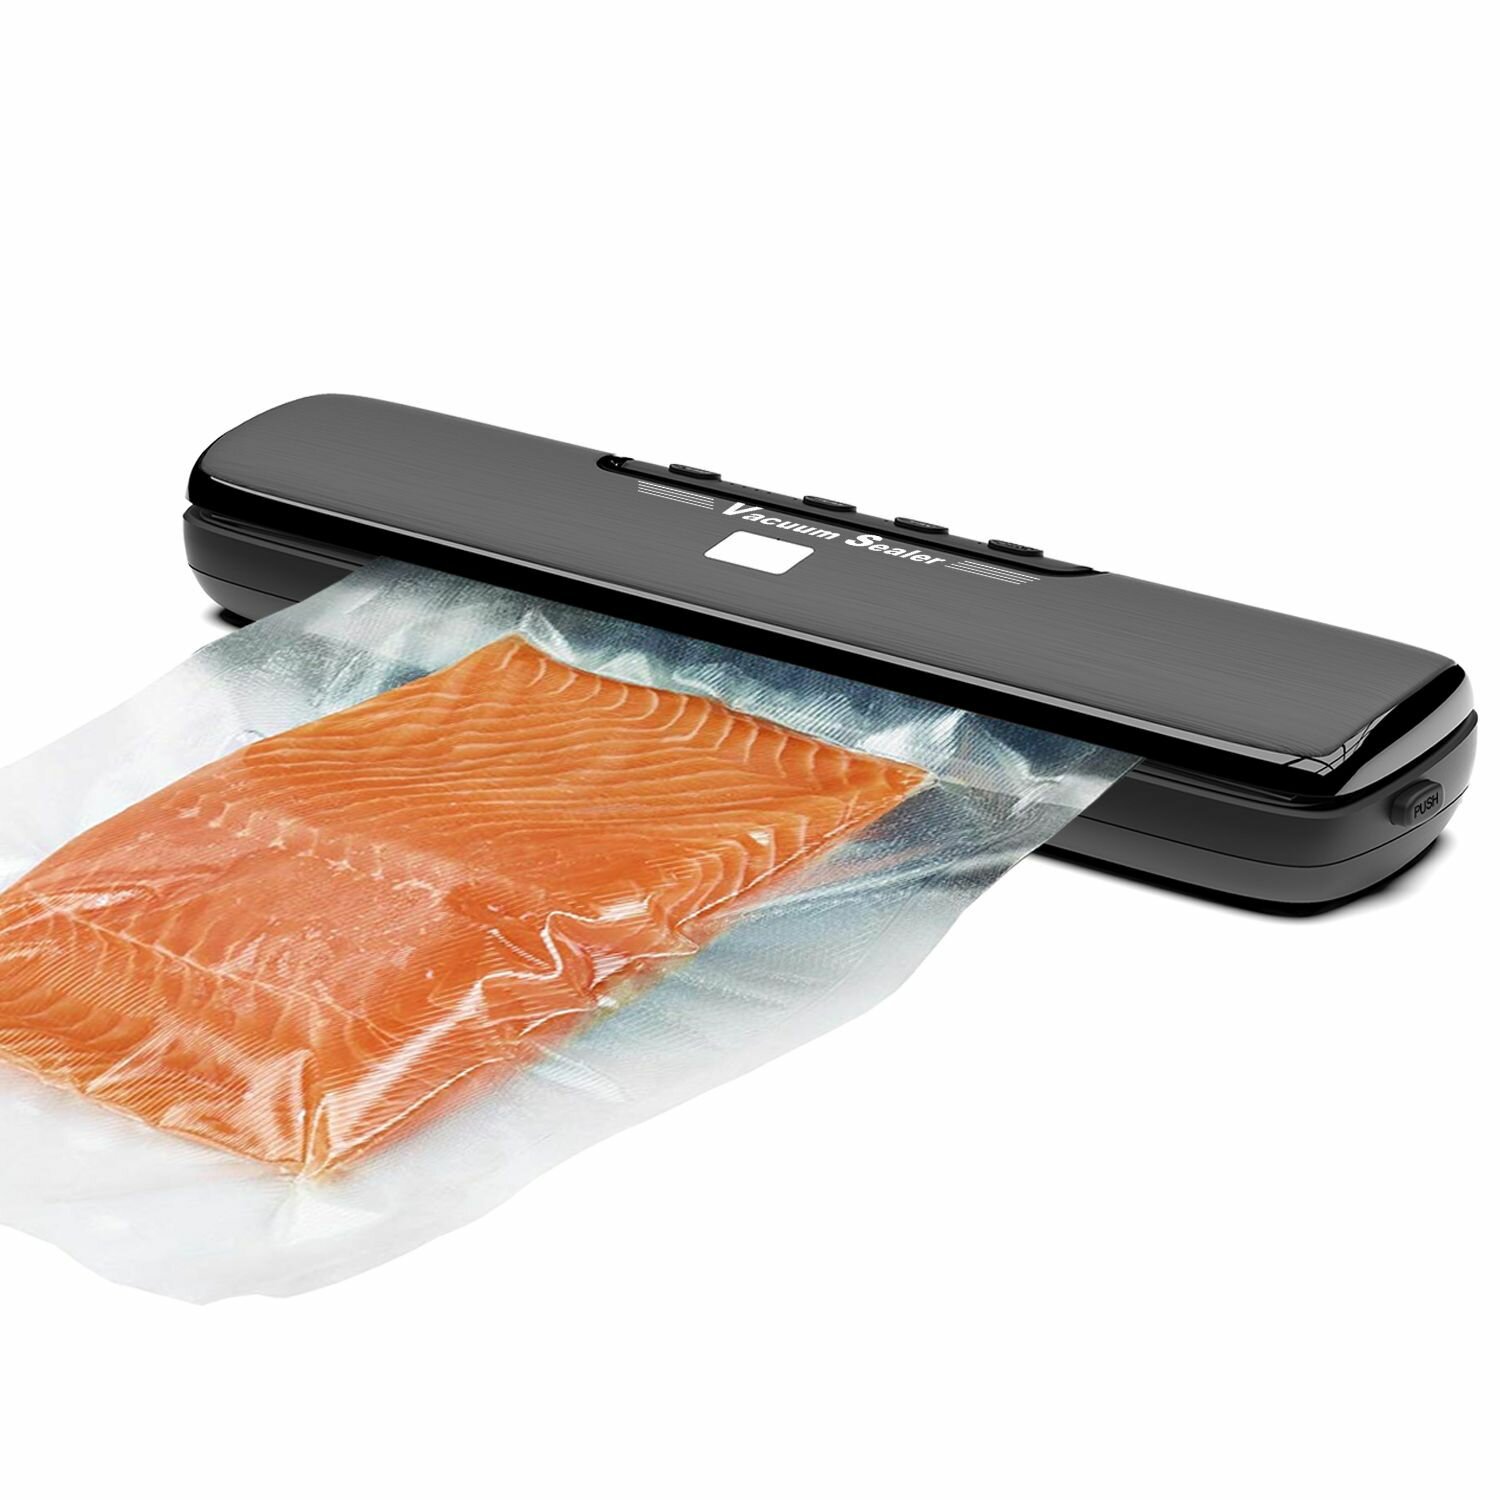 Vacuum Sealer 135W Keep Fresh Overheating Protection Wet And Dry Available for Kitchen